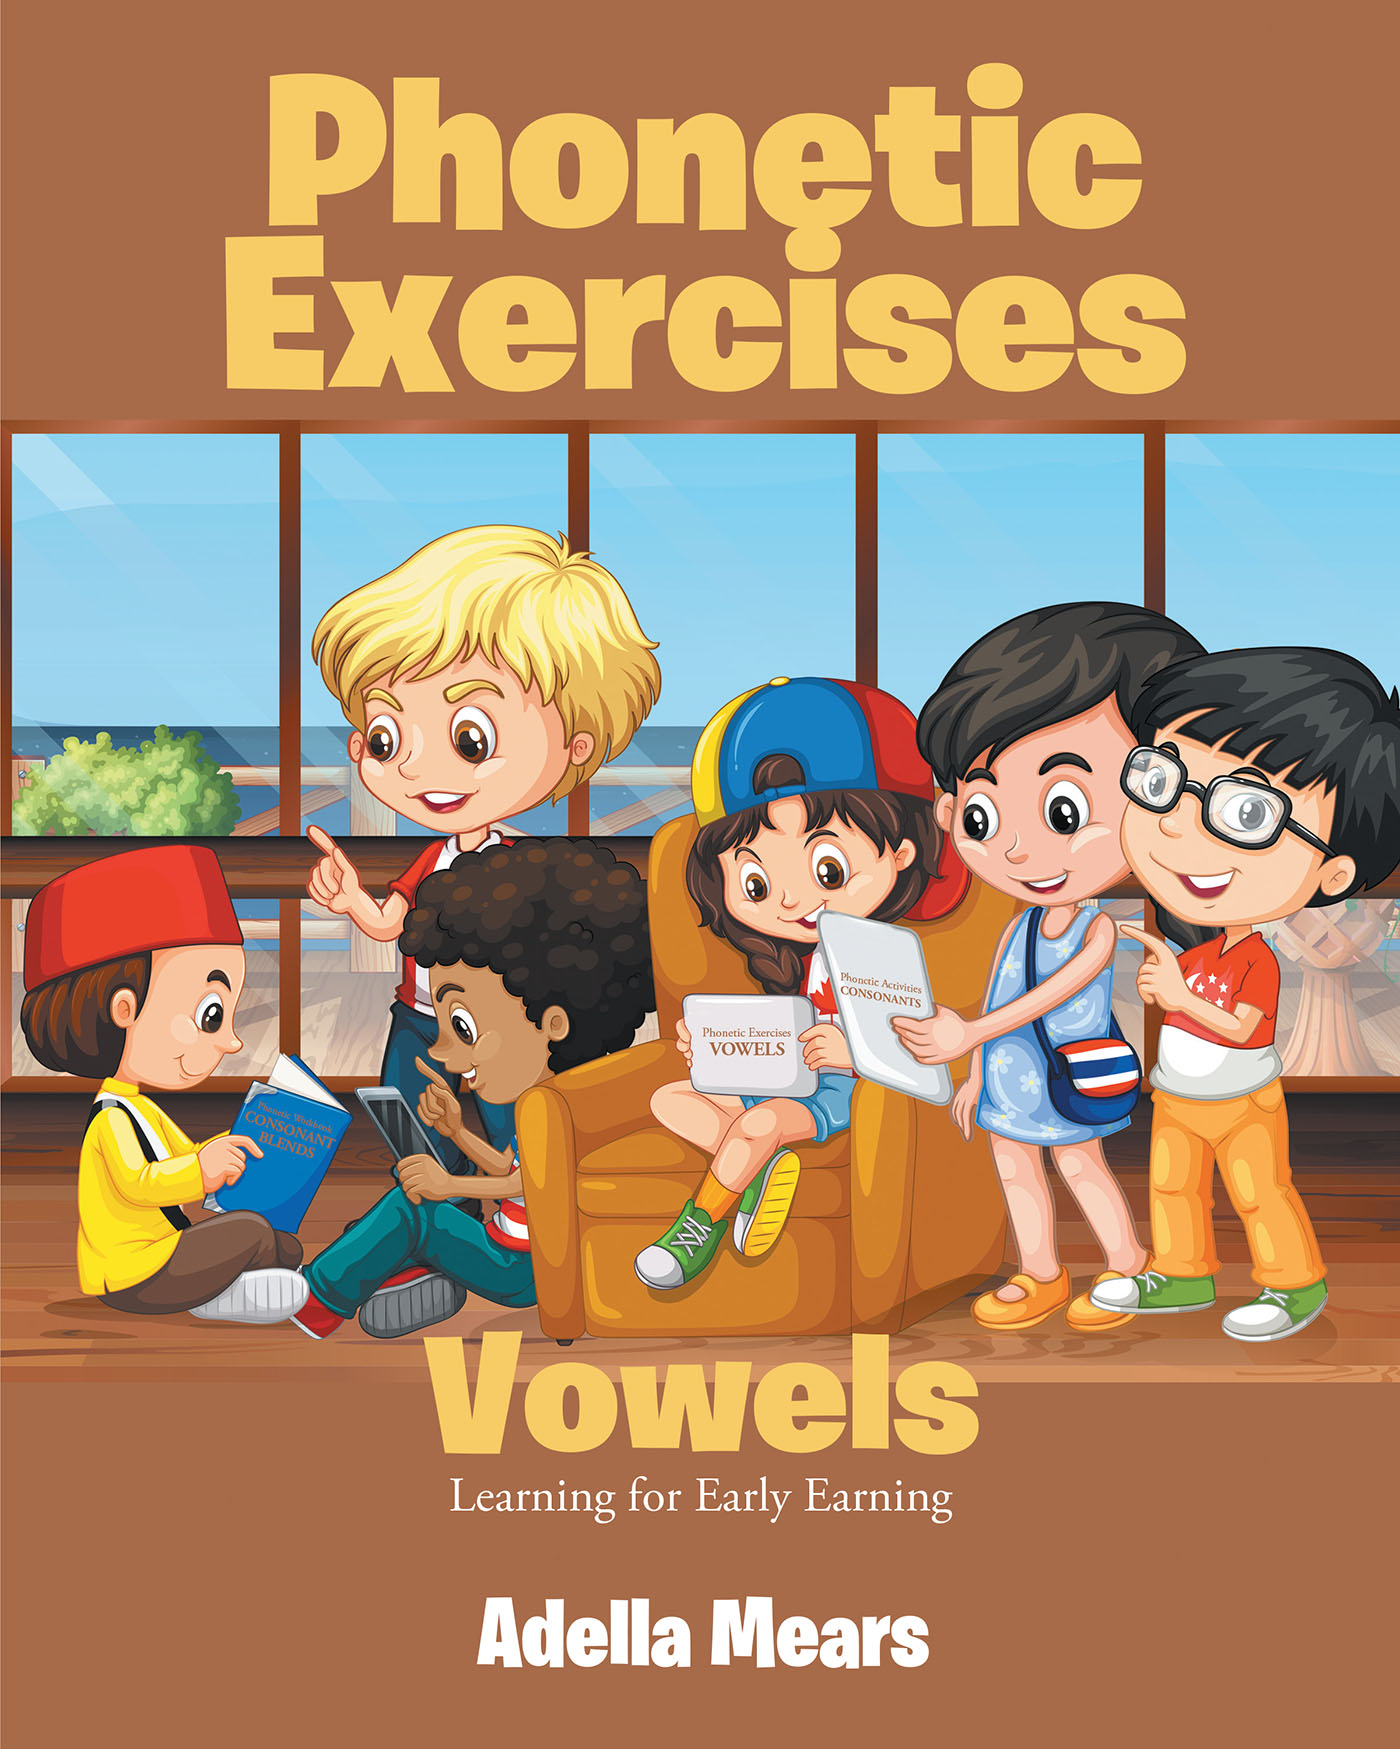 Adella Mears’s Newly Released "Phonetic Activities: Vowels" is a Helpful Opportunity to Build Early Language Skills